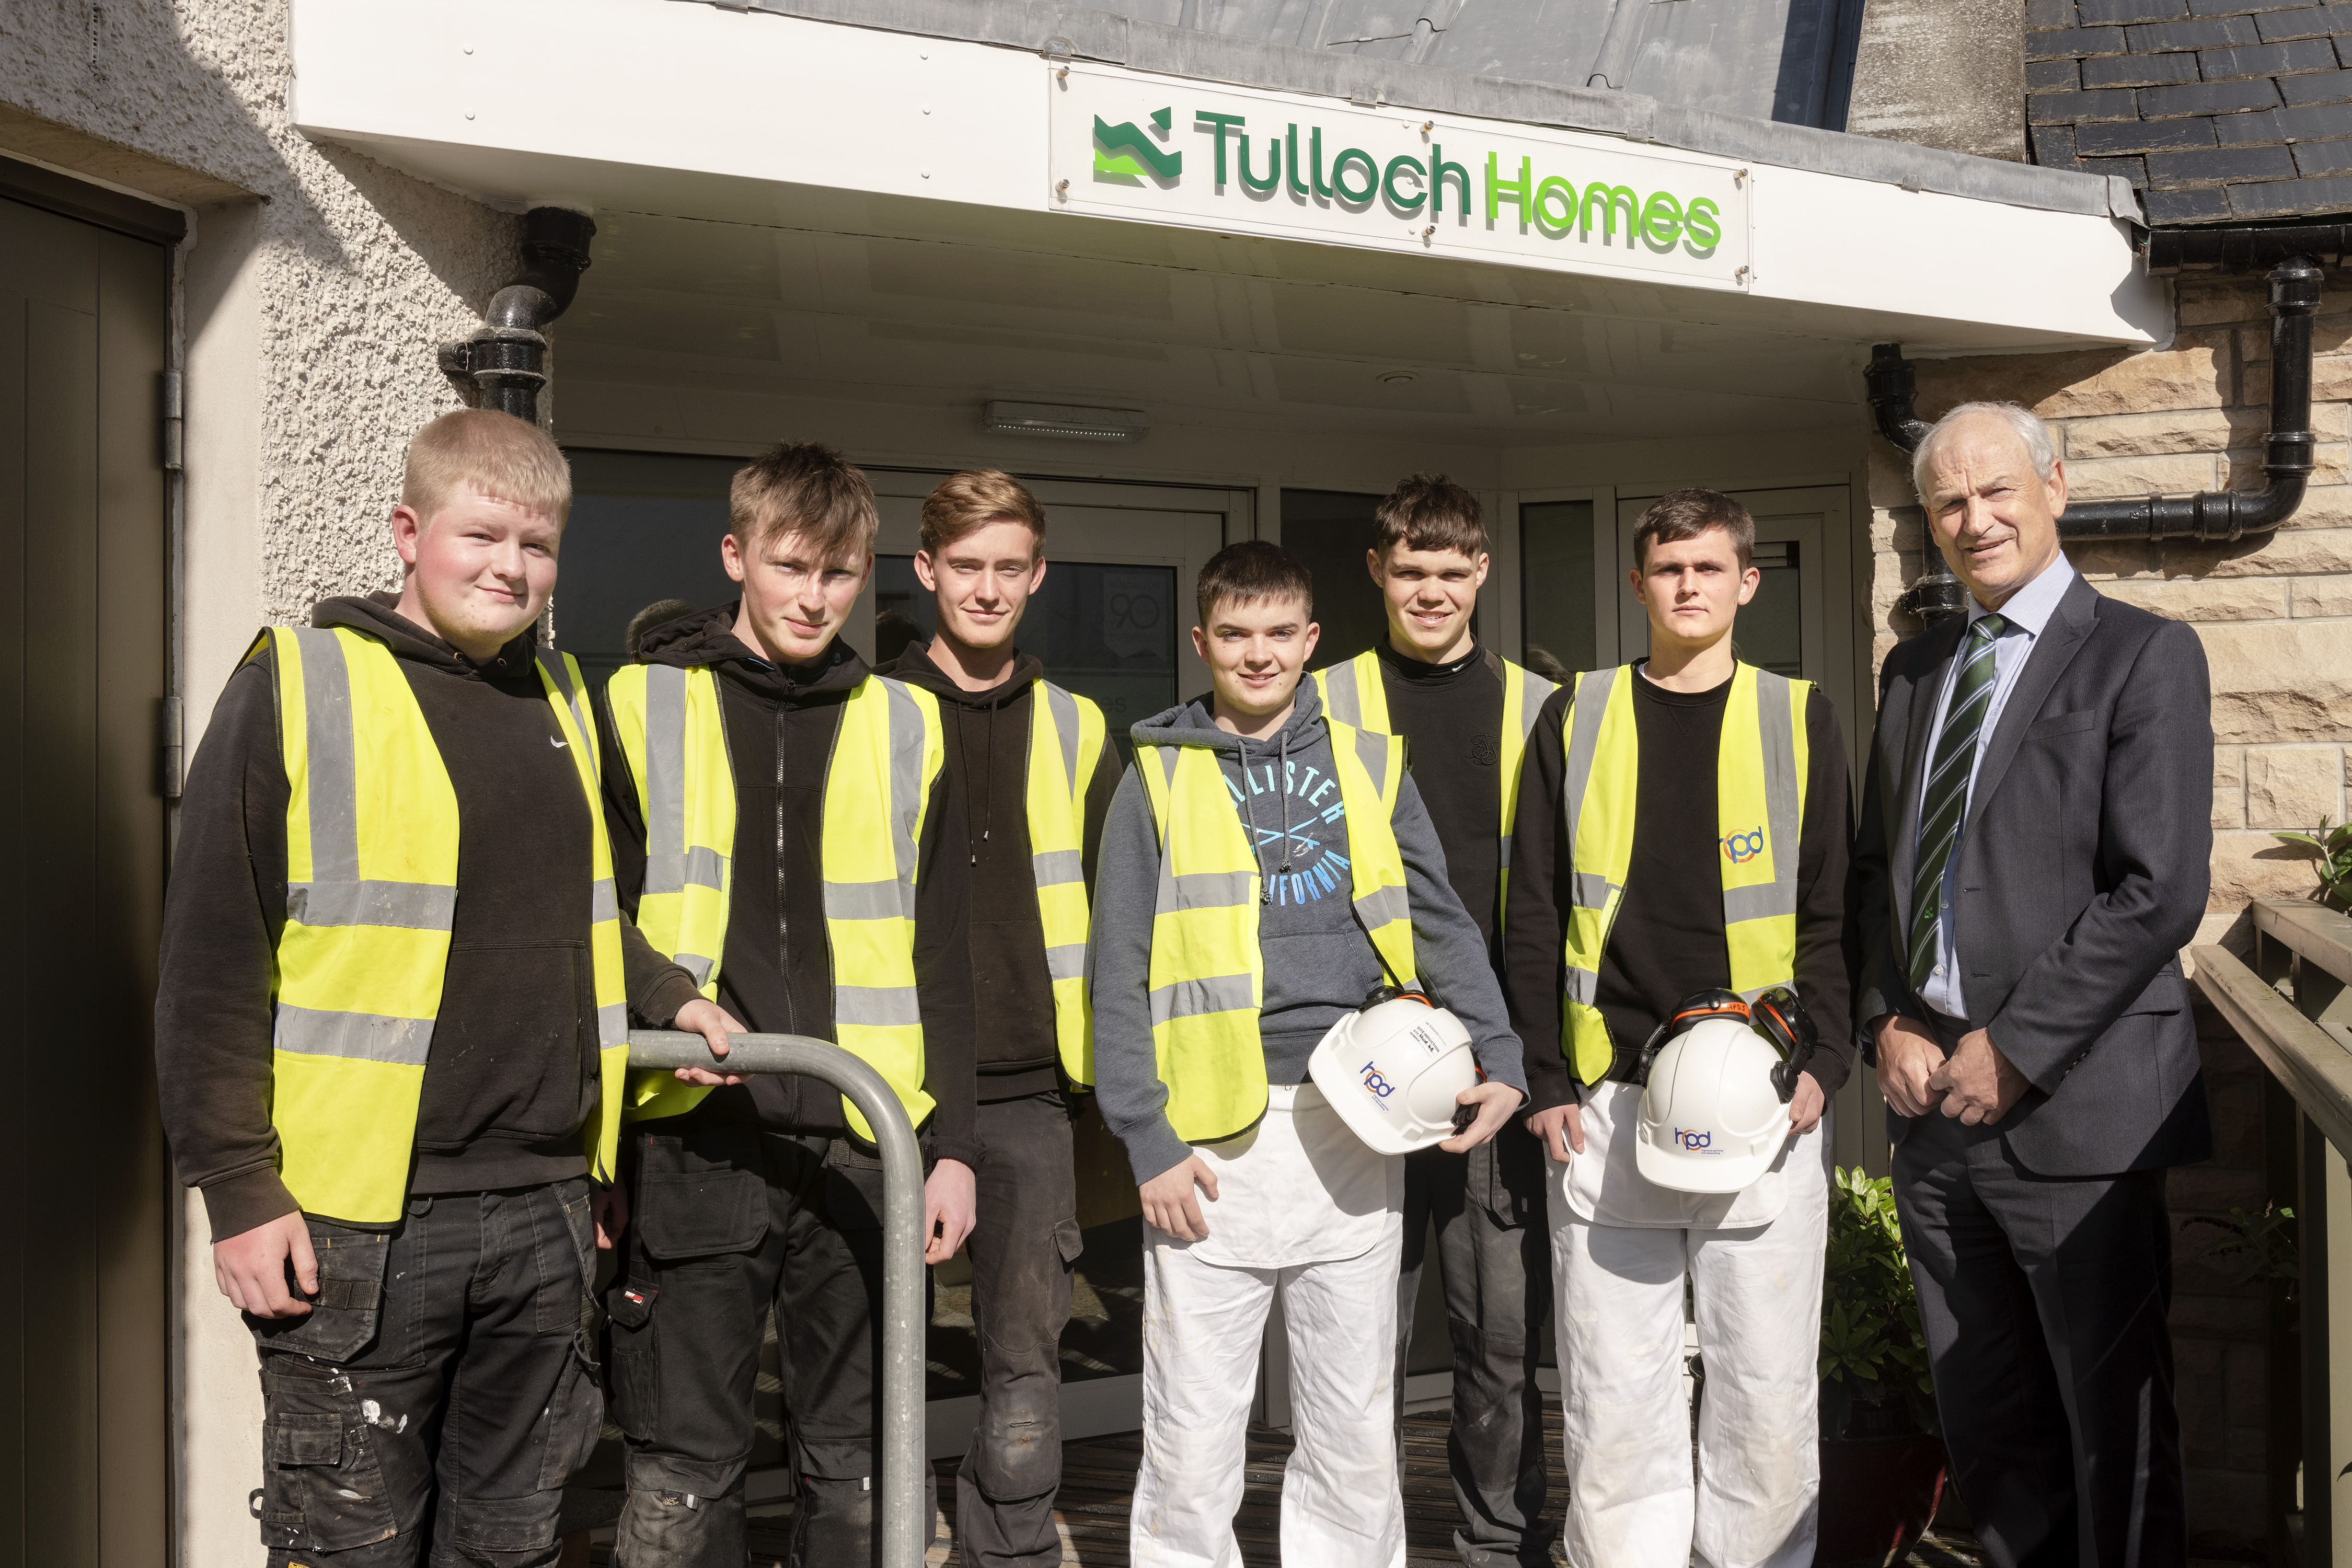 New recruits for Tulloch Homes ‘grow your own’ approach